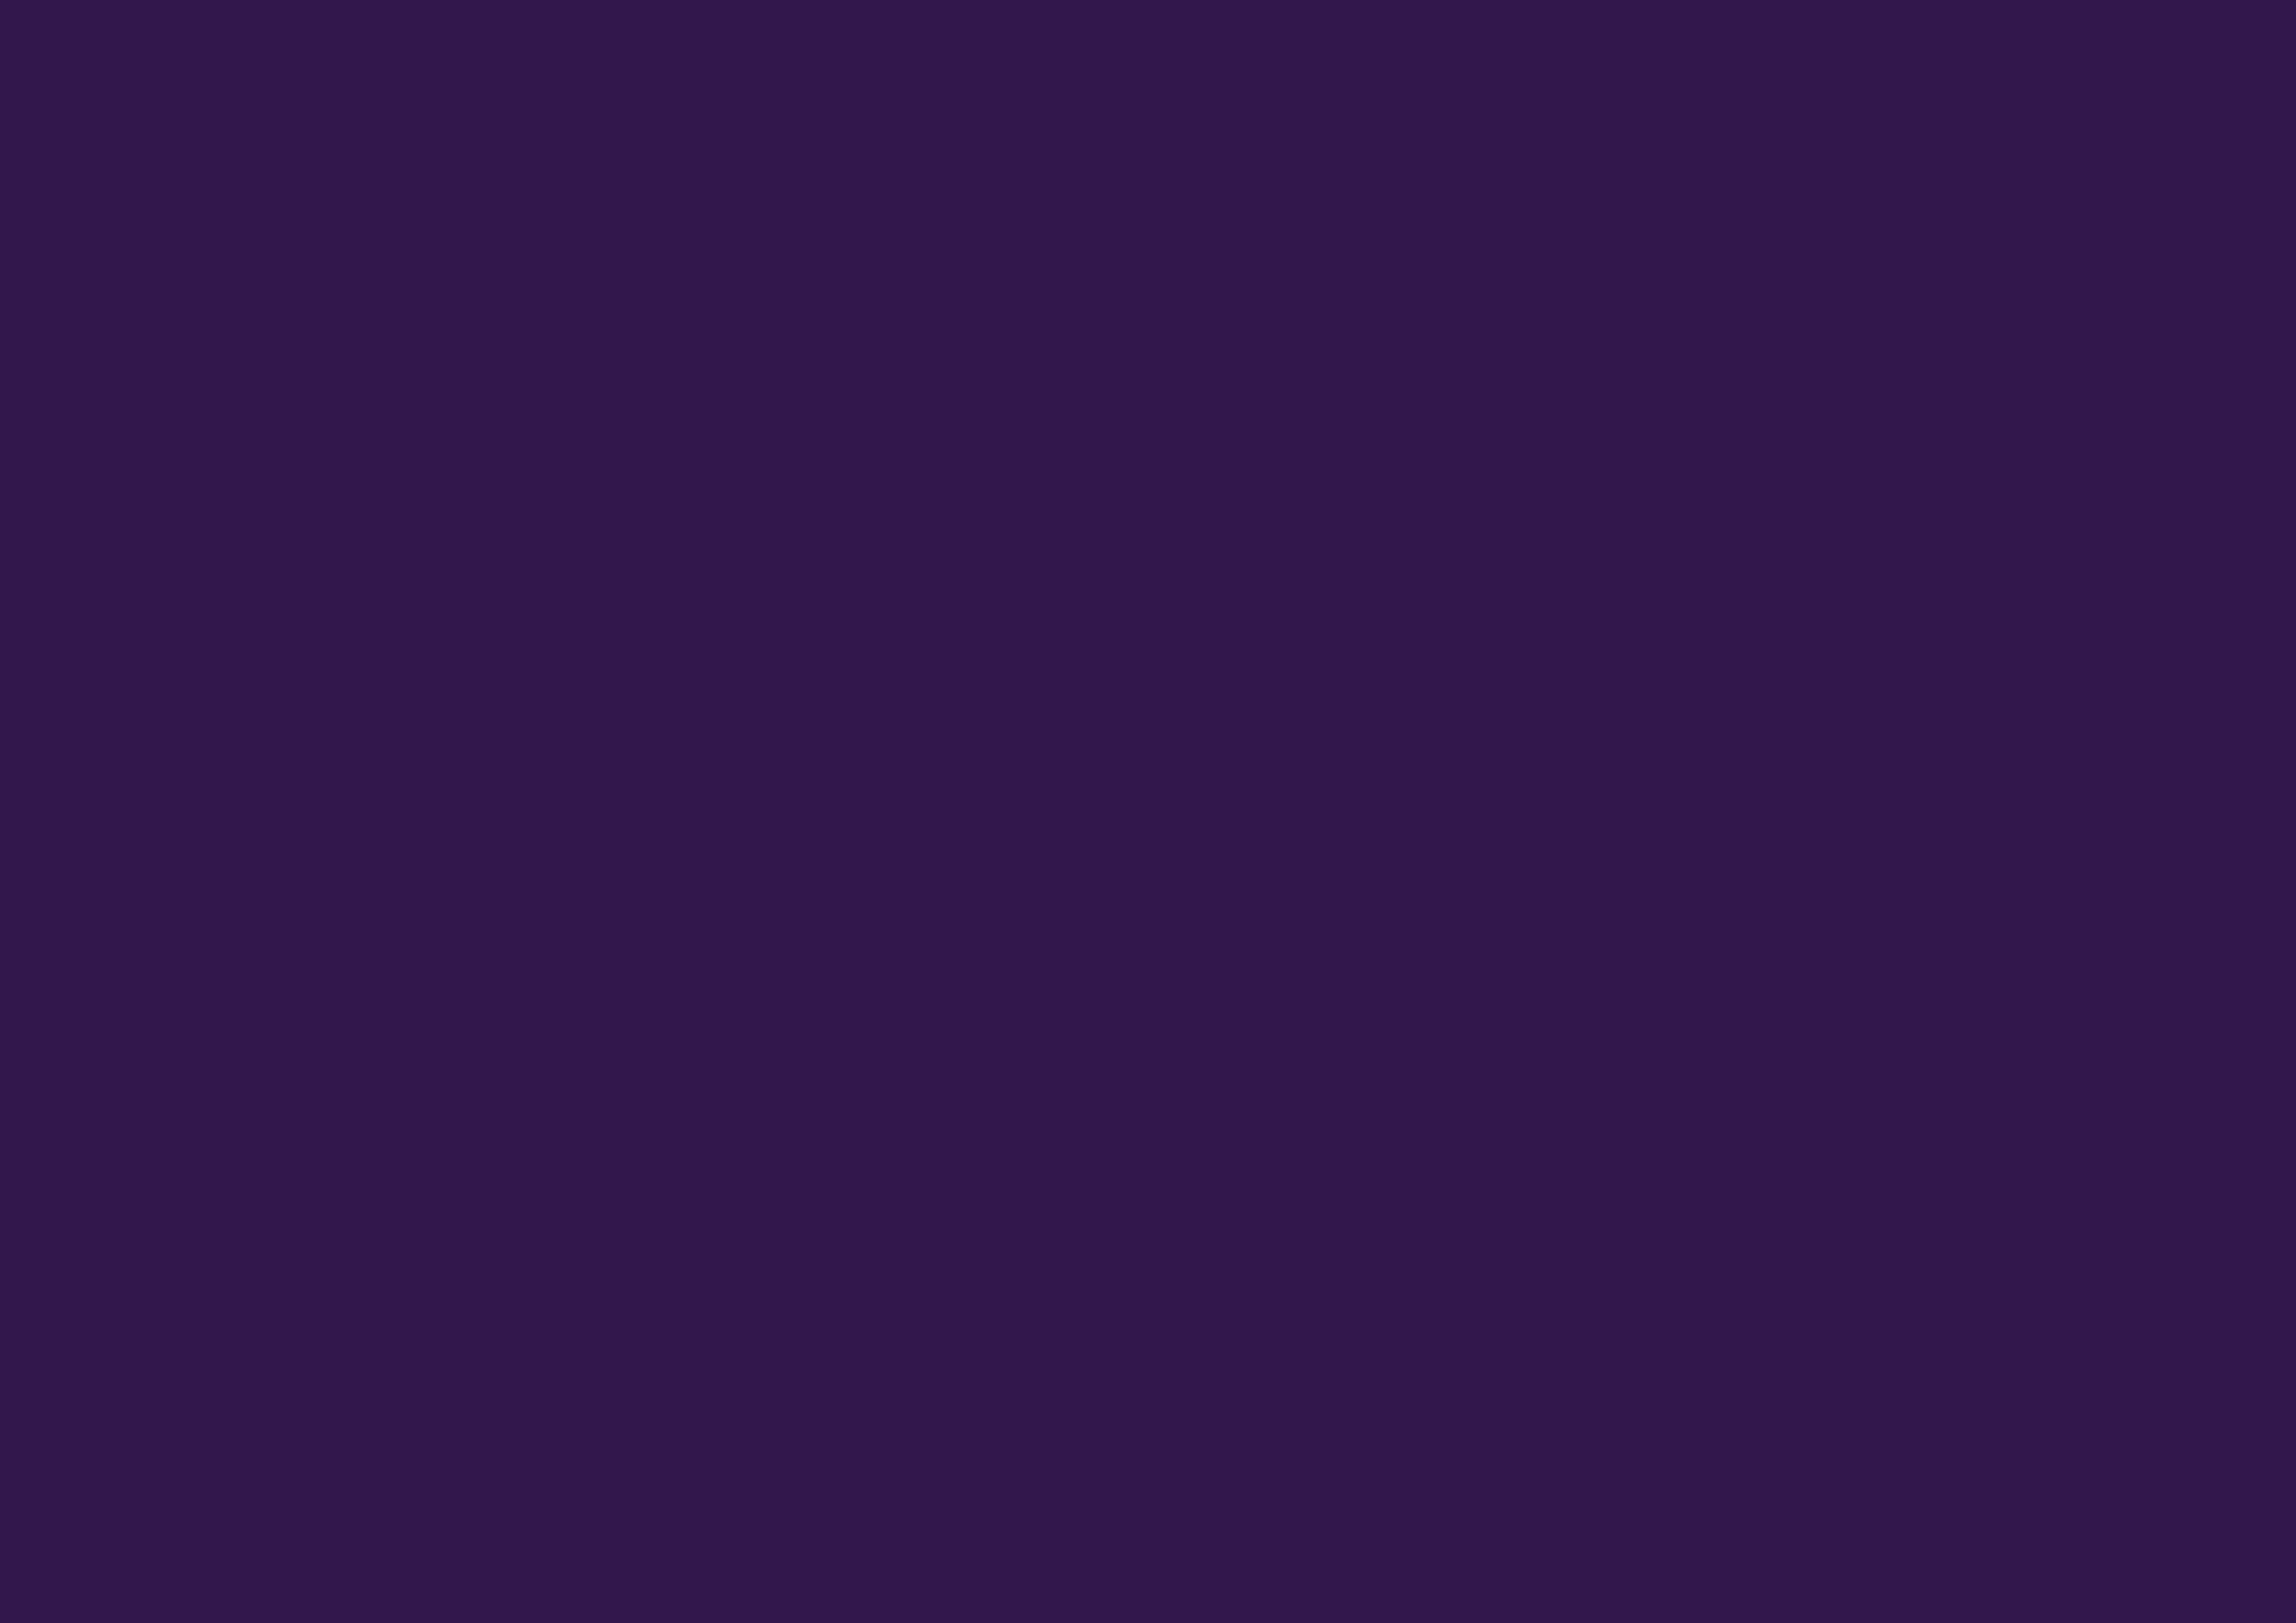 3508x2480 Russian Violet Solid Color Background